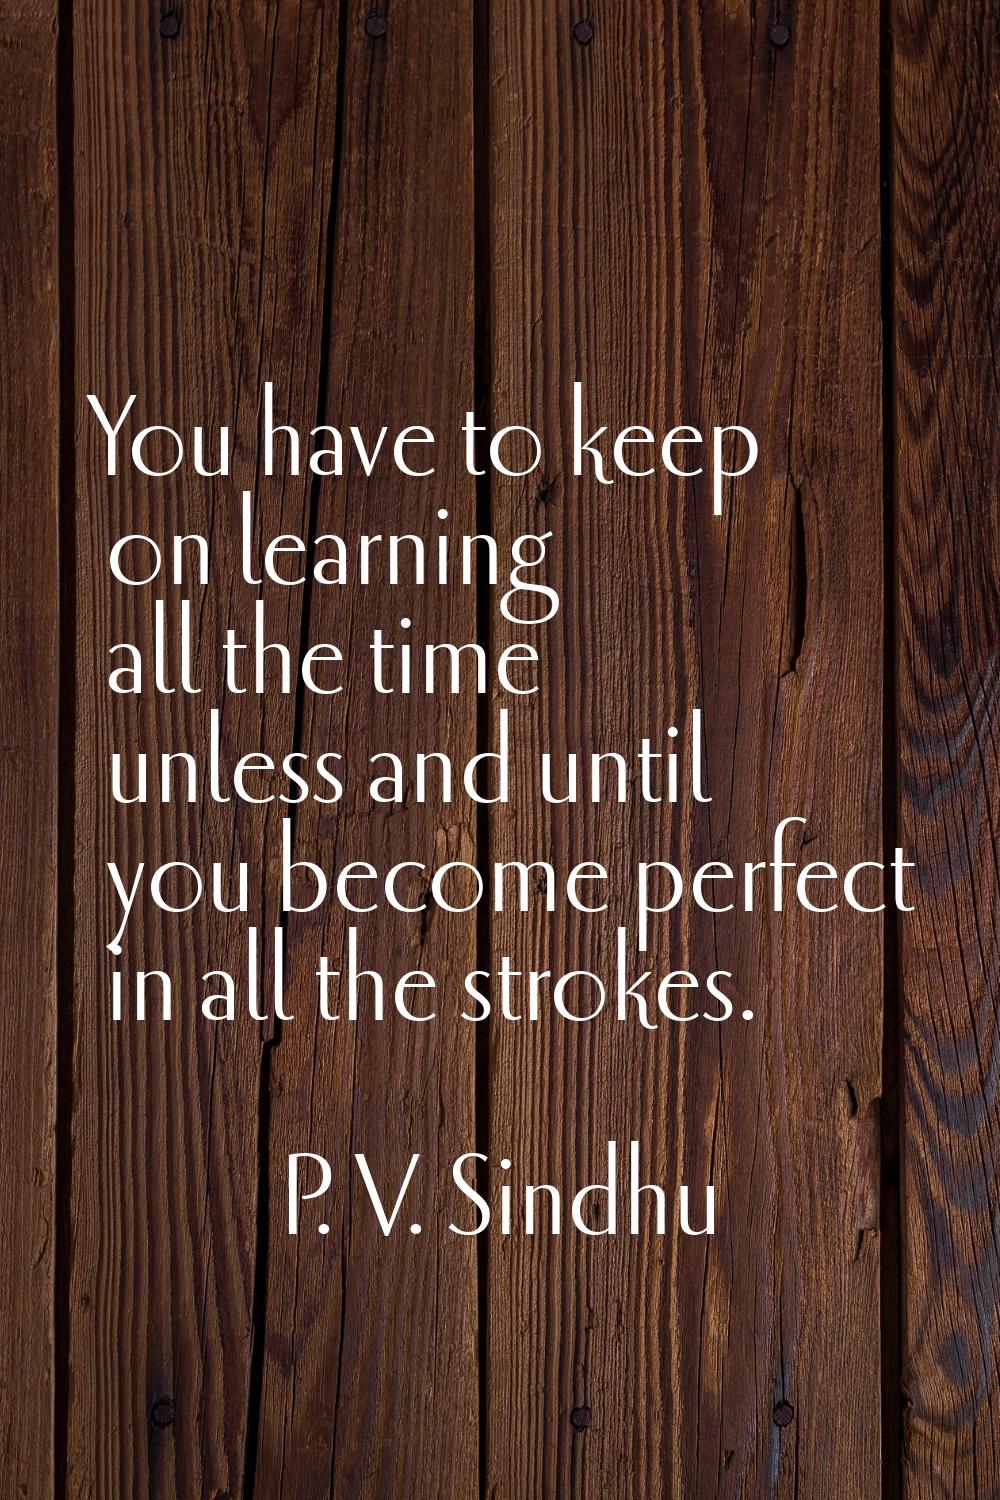 You have to keep on learning all the time unless and until you become perfect in all the strokes.